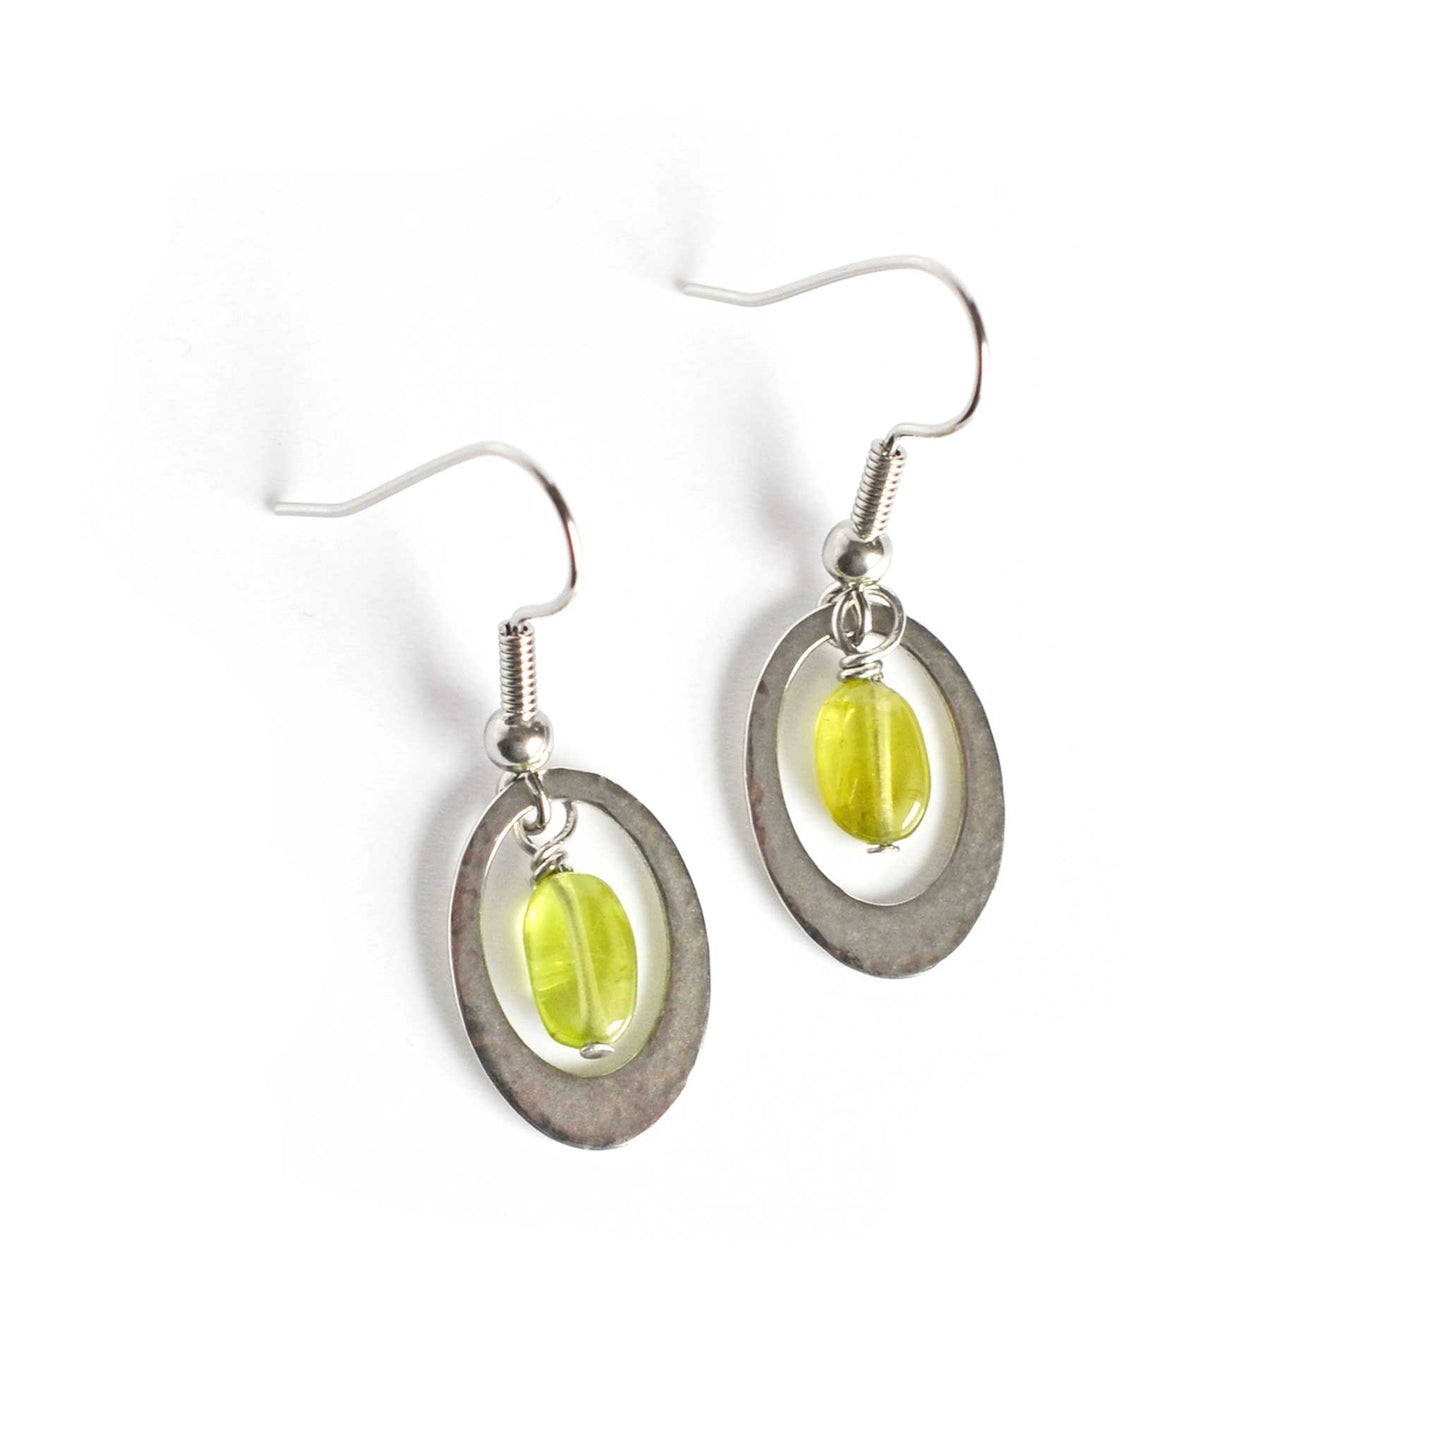 Pair of oval Peridot earrings with hypoallergenic surgical steel hooks on white background.